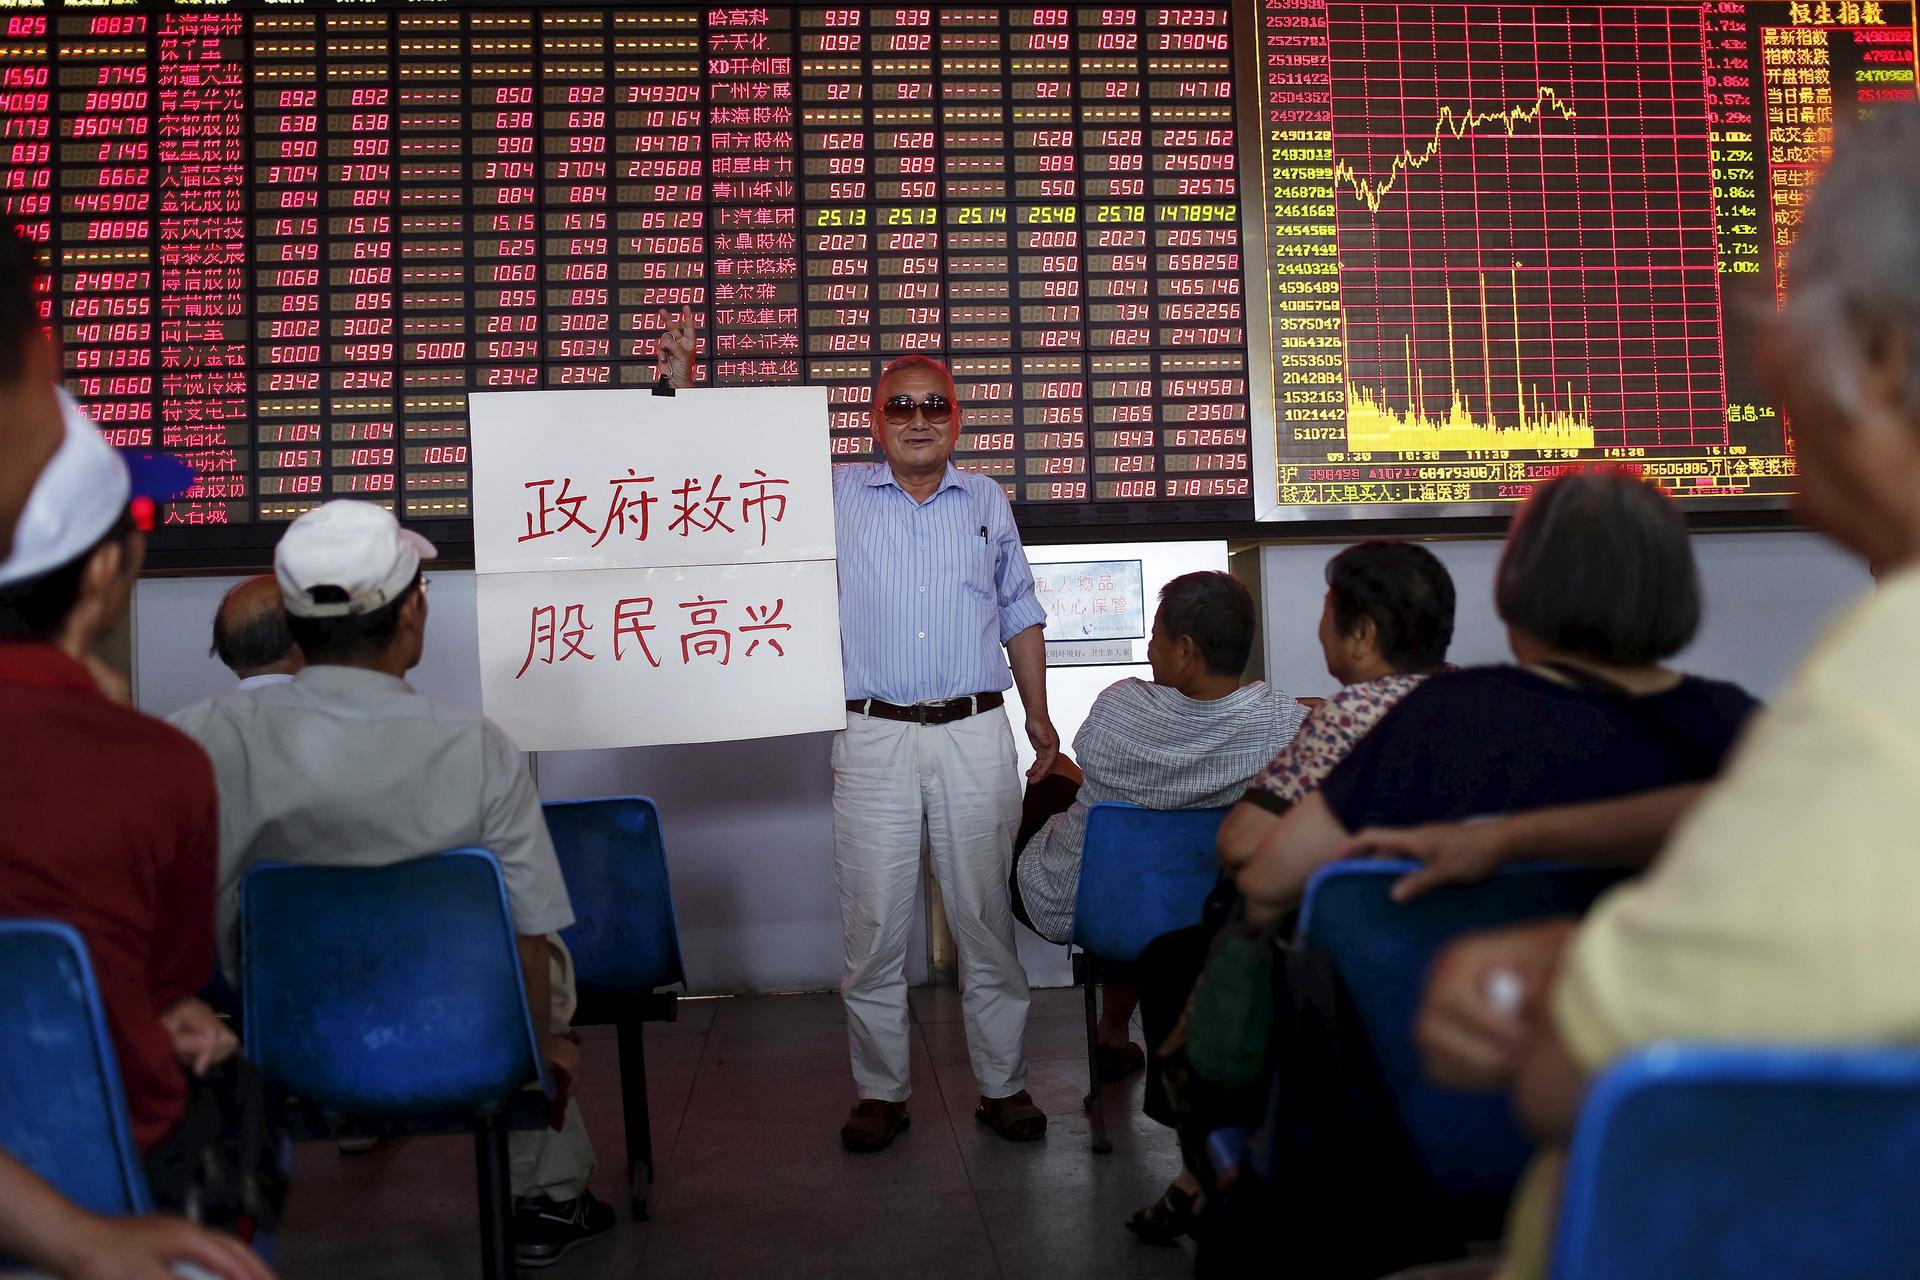 An investor holds a board saying "government saves the market so that investors will be happy" at a stockbroking firm in Shanghai. Photo: Reuters